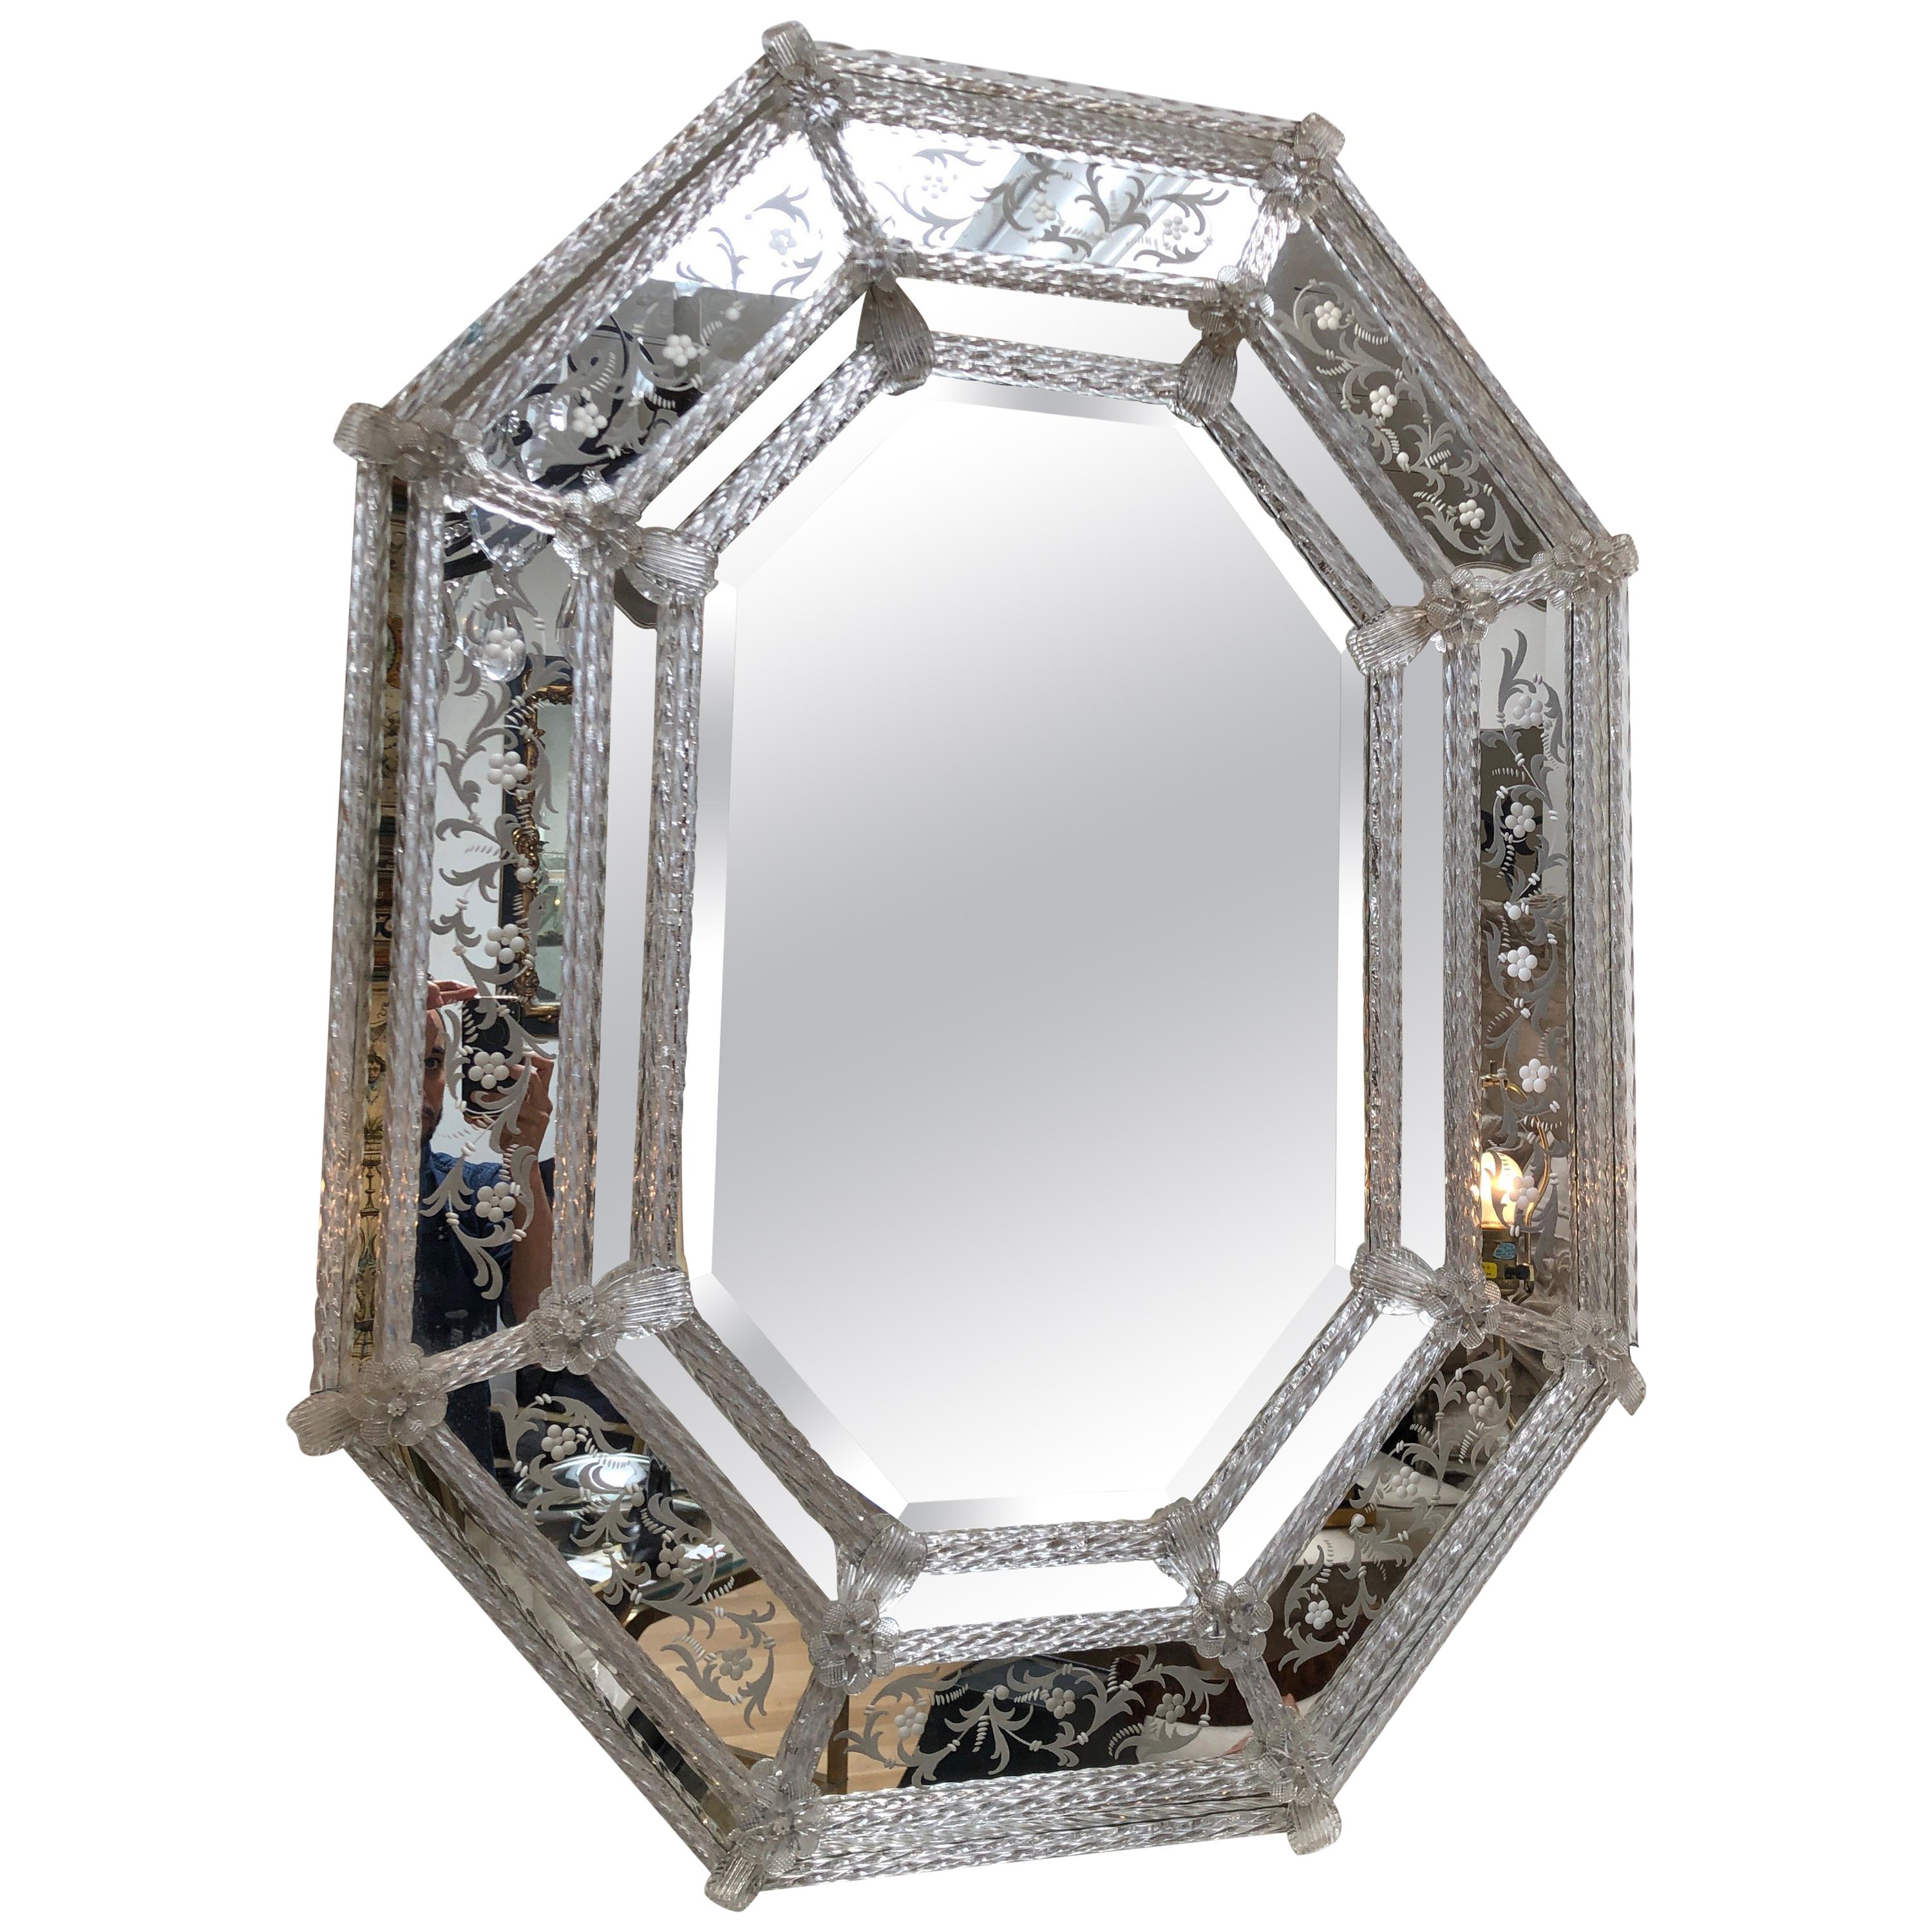 Late 19th or Early 20th Century Venetian Mirror